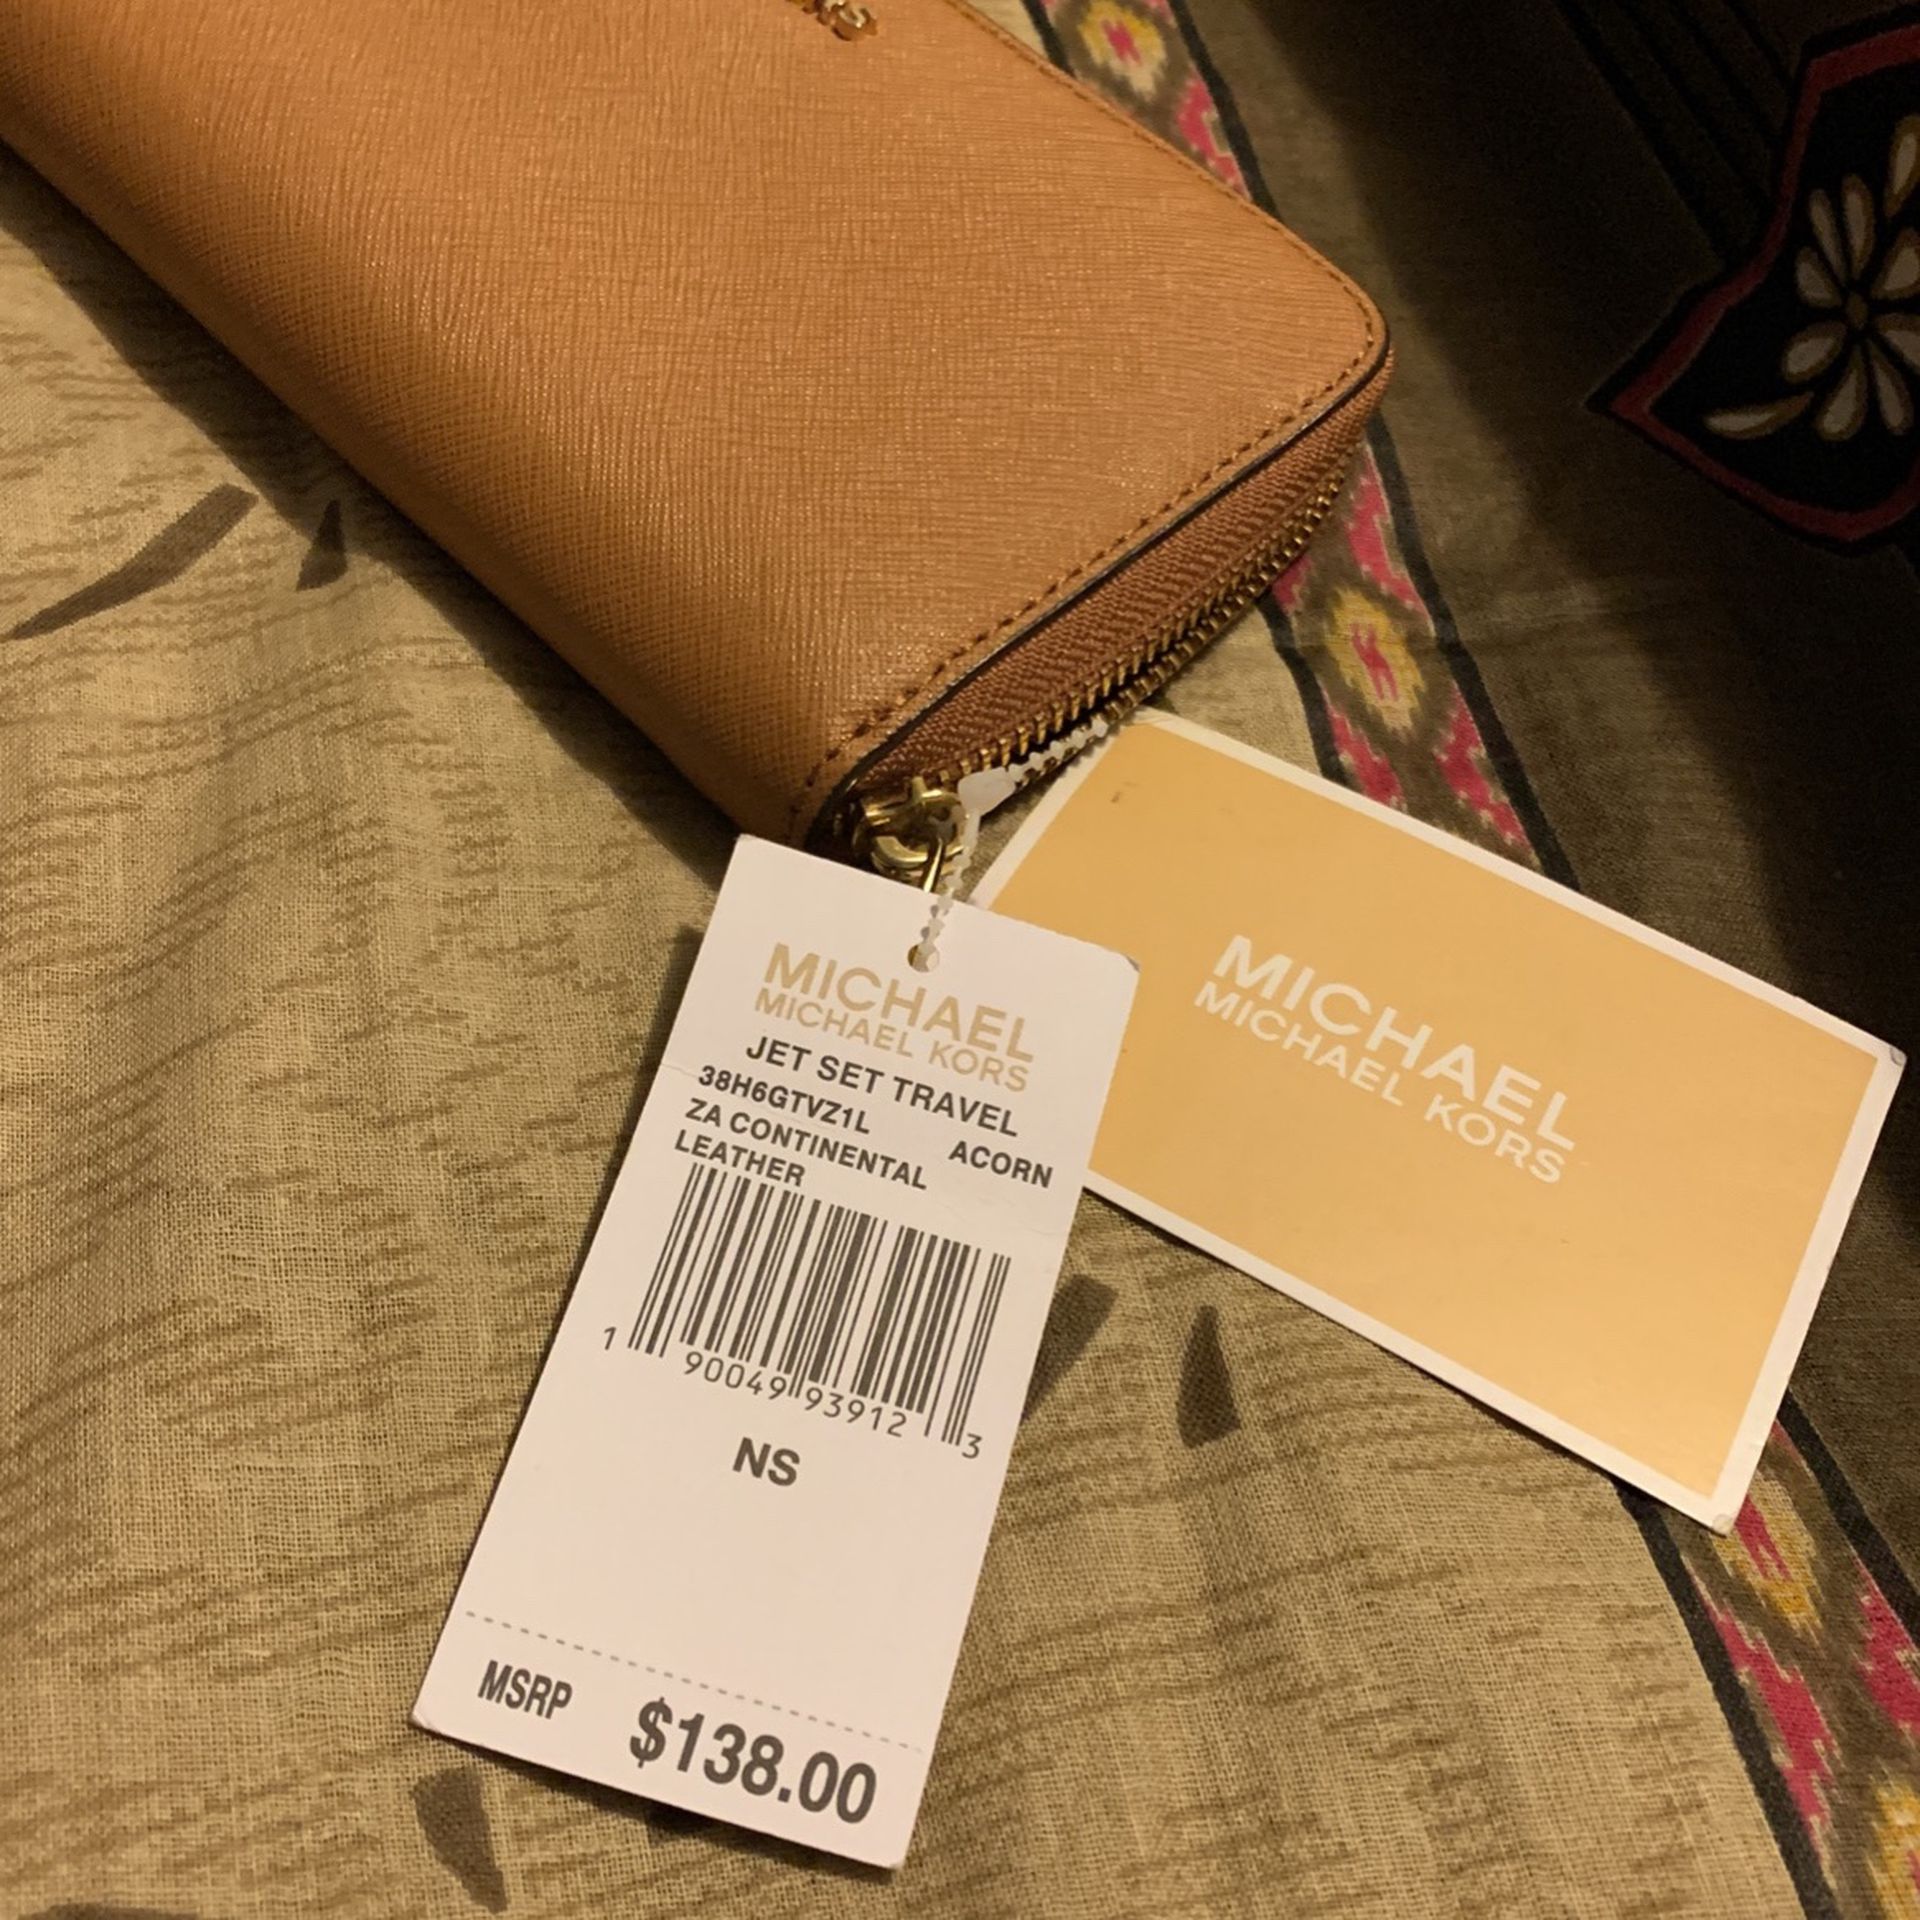 Michael Kors authentic wallet / Wristlet with tags still attached